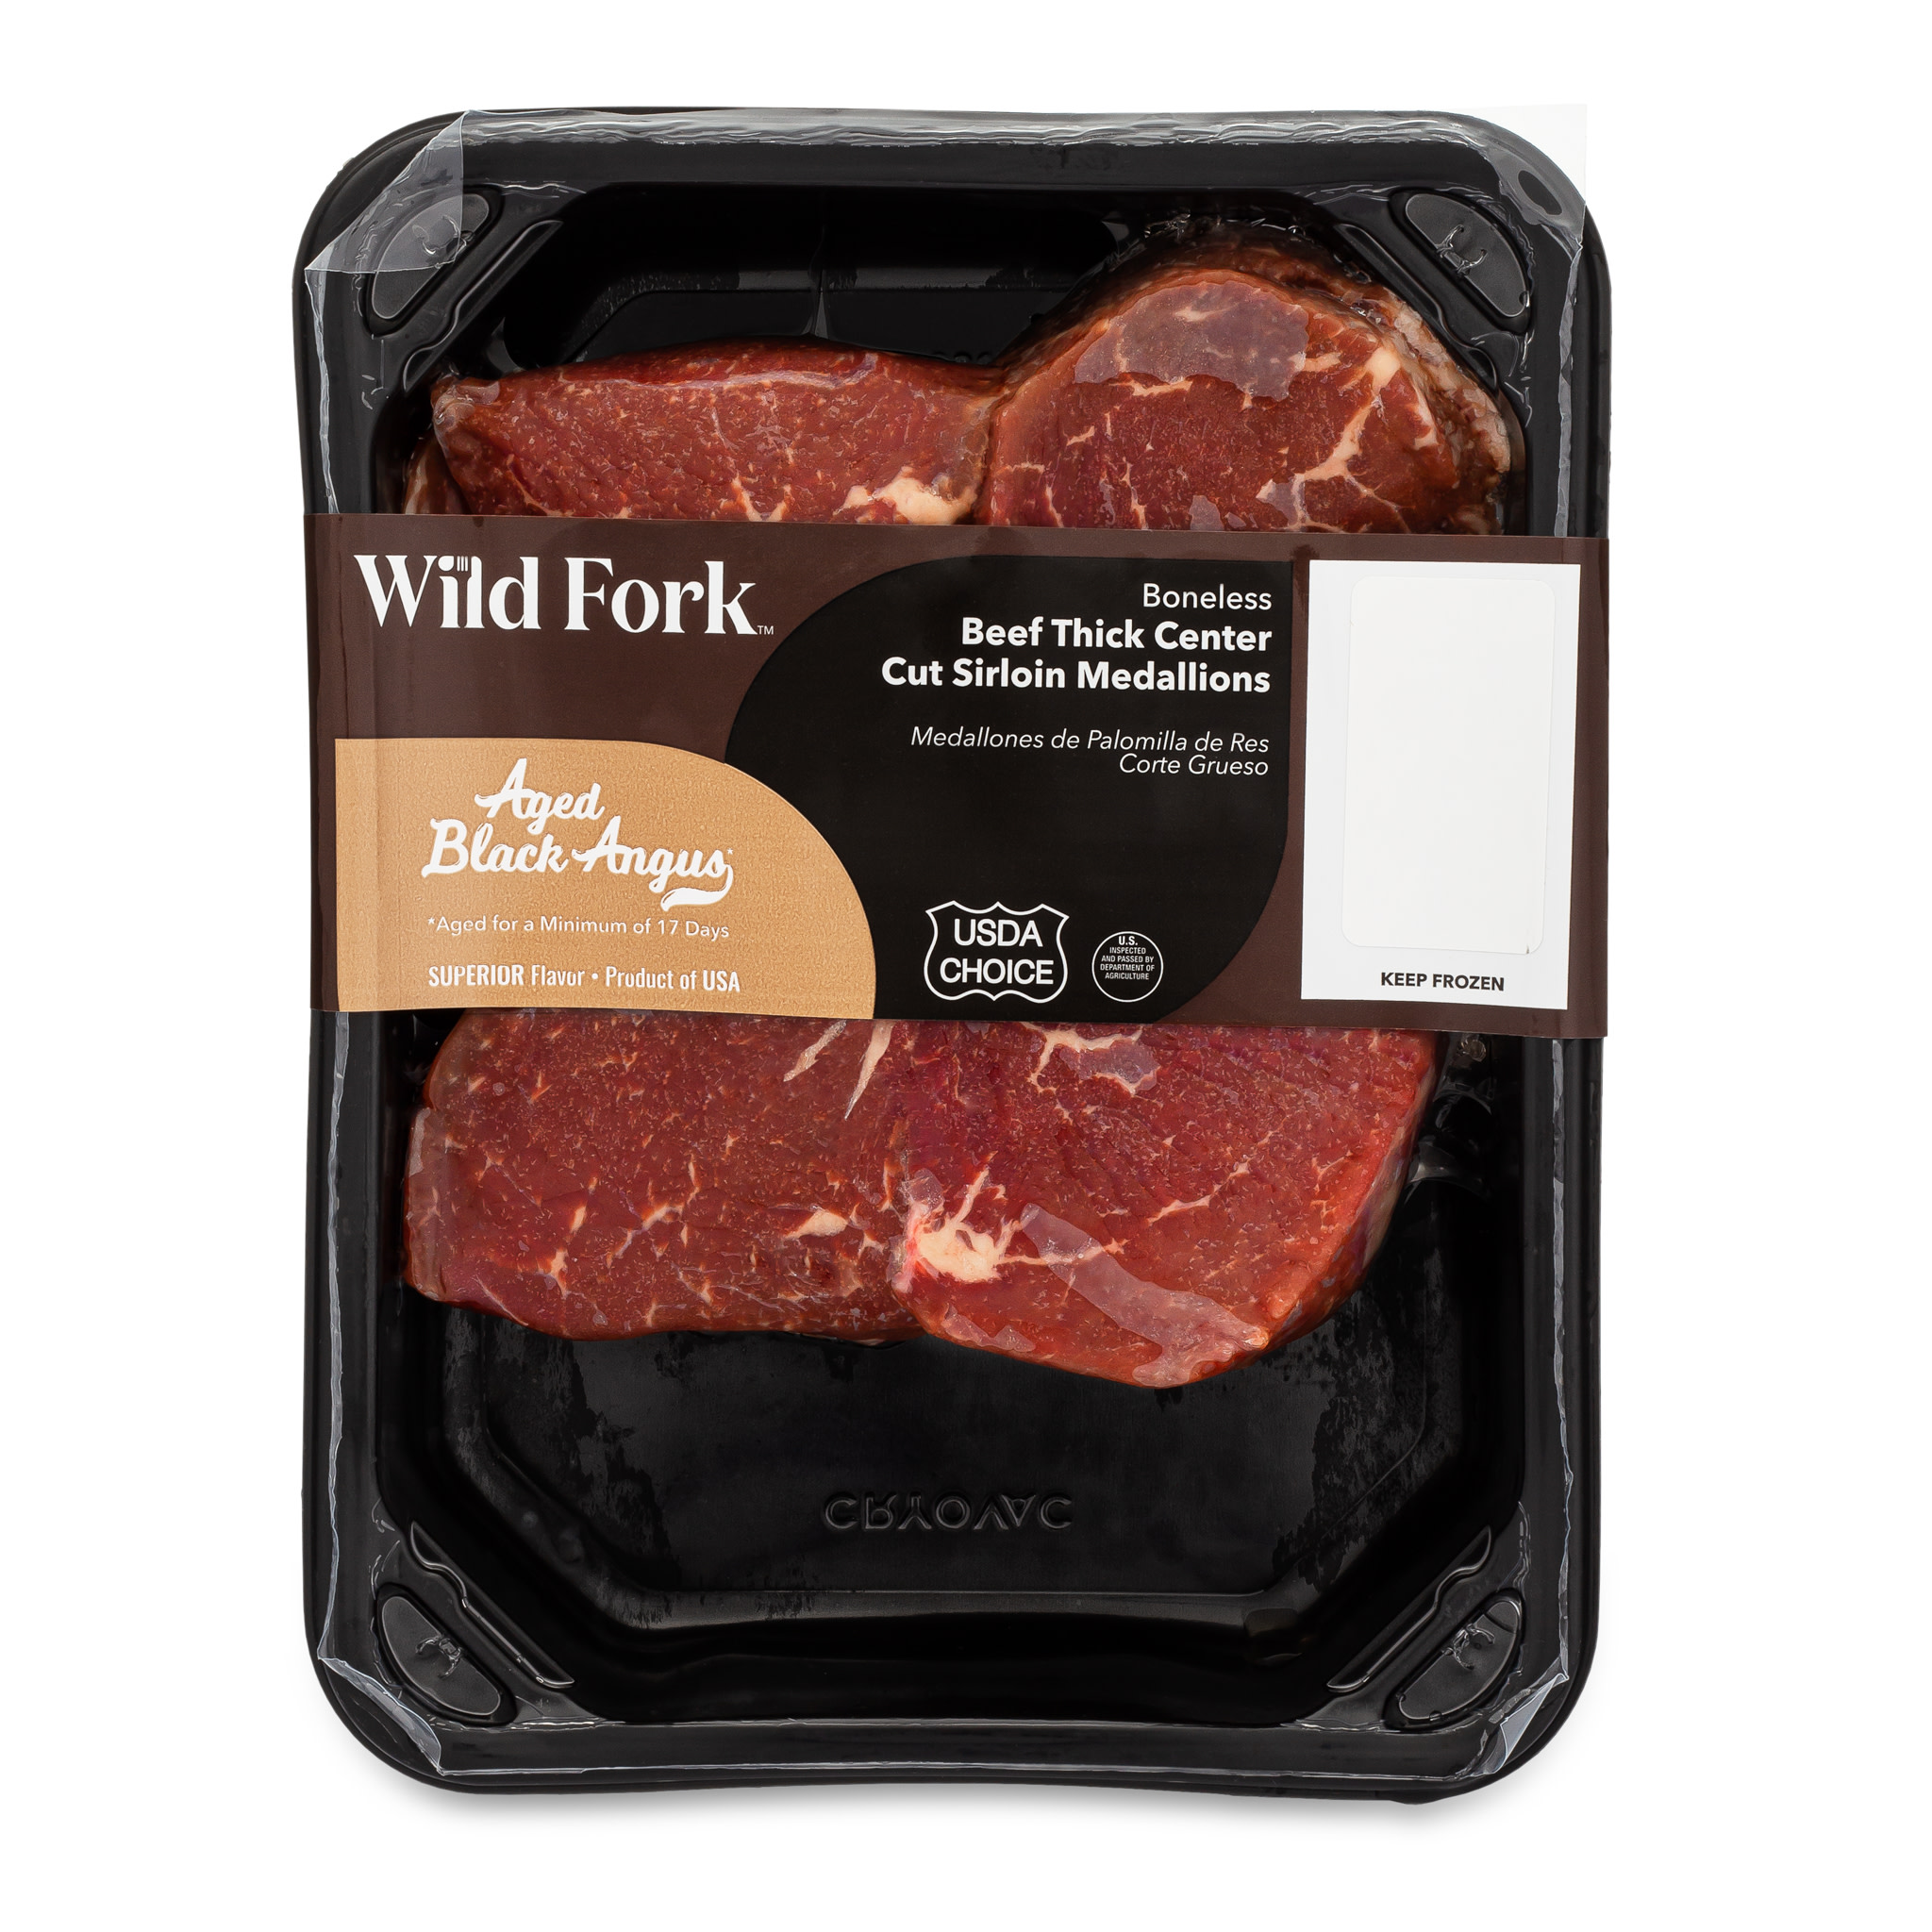 1213 WF PACKAGED USDA Choice Black Angus Beef Thick Center Cut Sirloin Medallions Beef